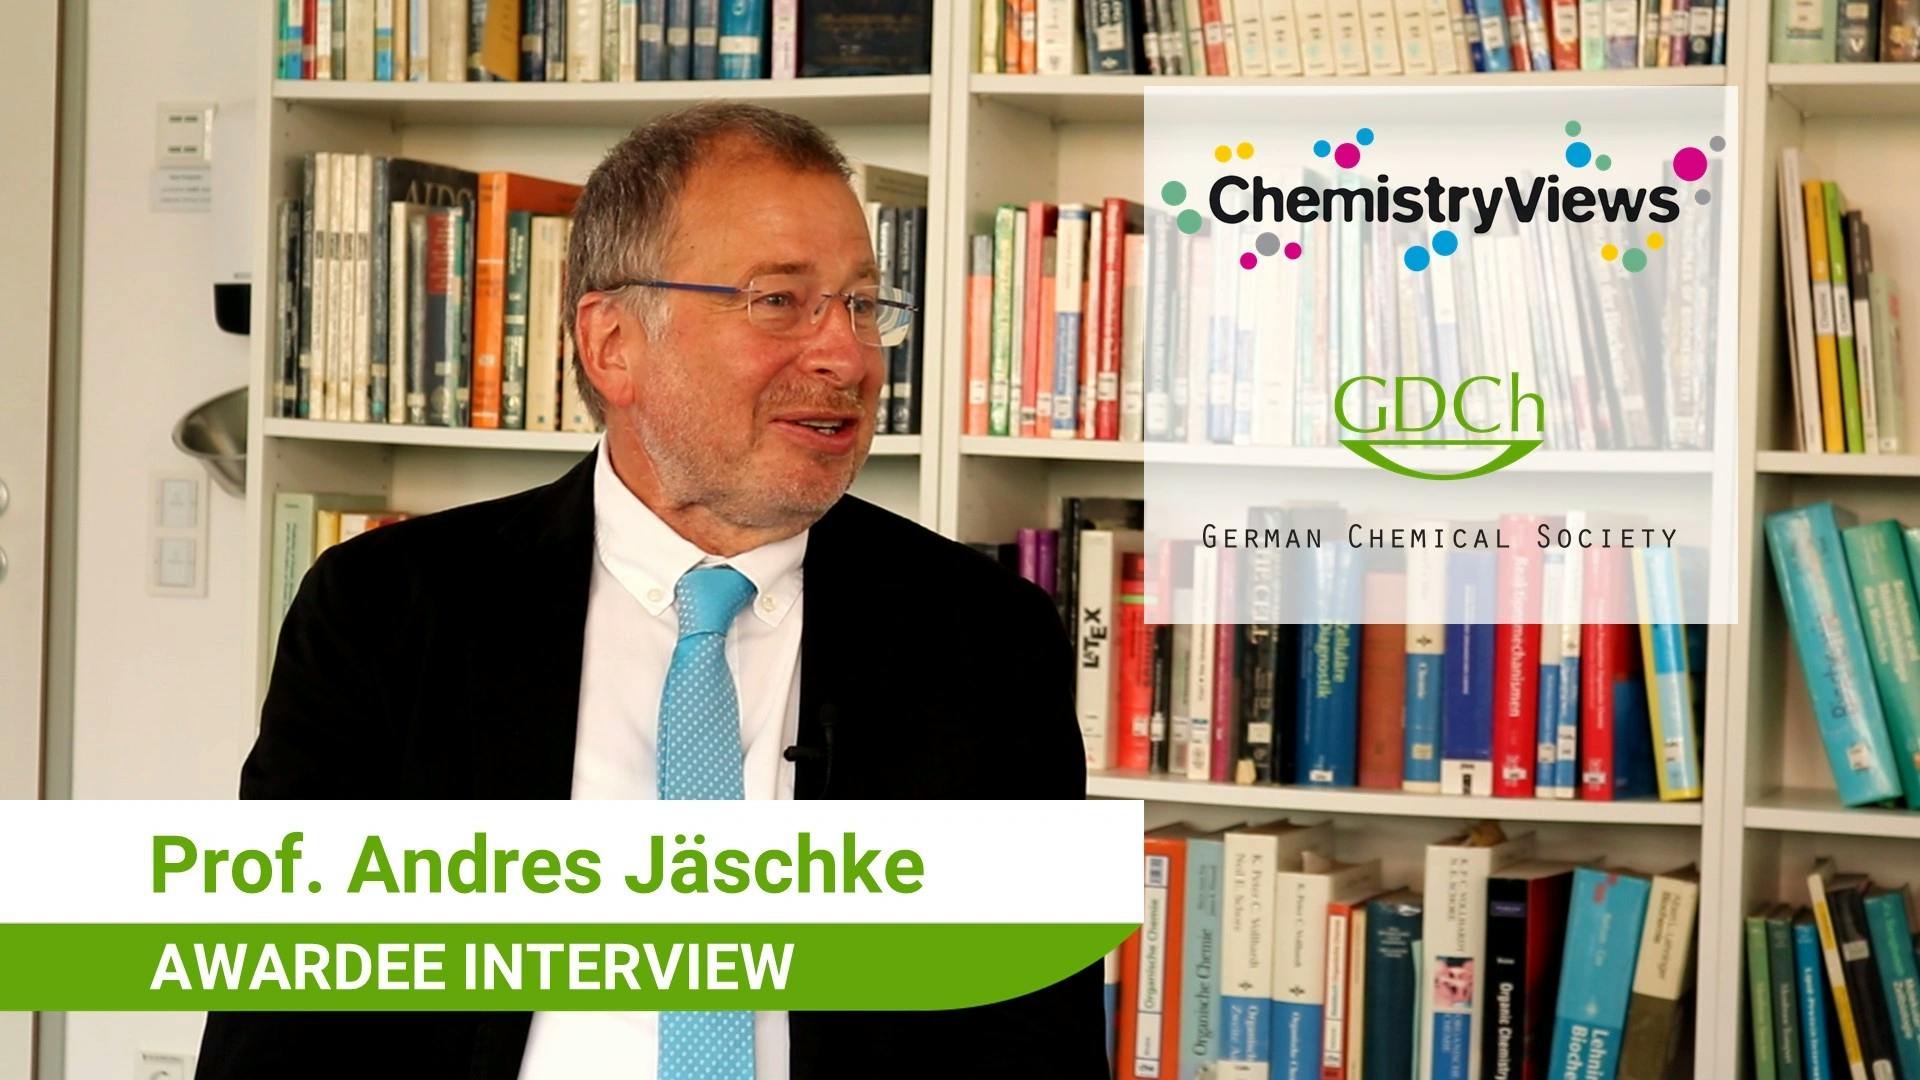 "Suddenly you have the idea." - Awardee interview with Andres Jäschke